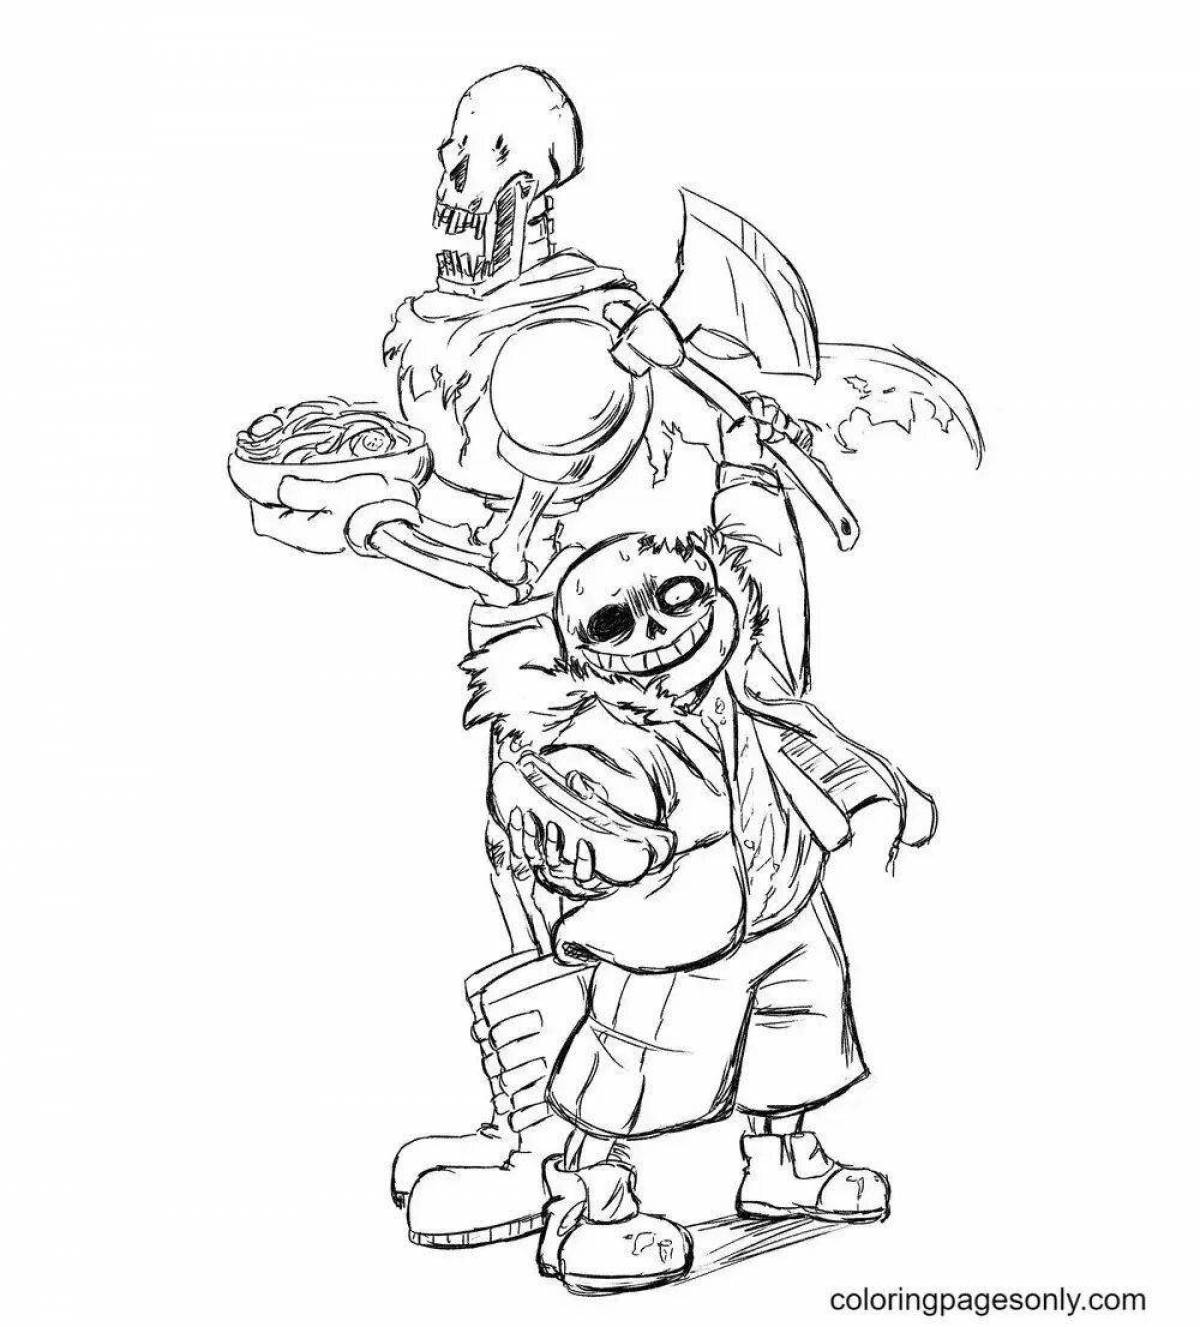 Coloring page of vibrant papyrus and sans